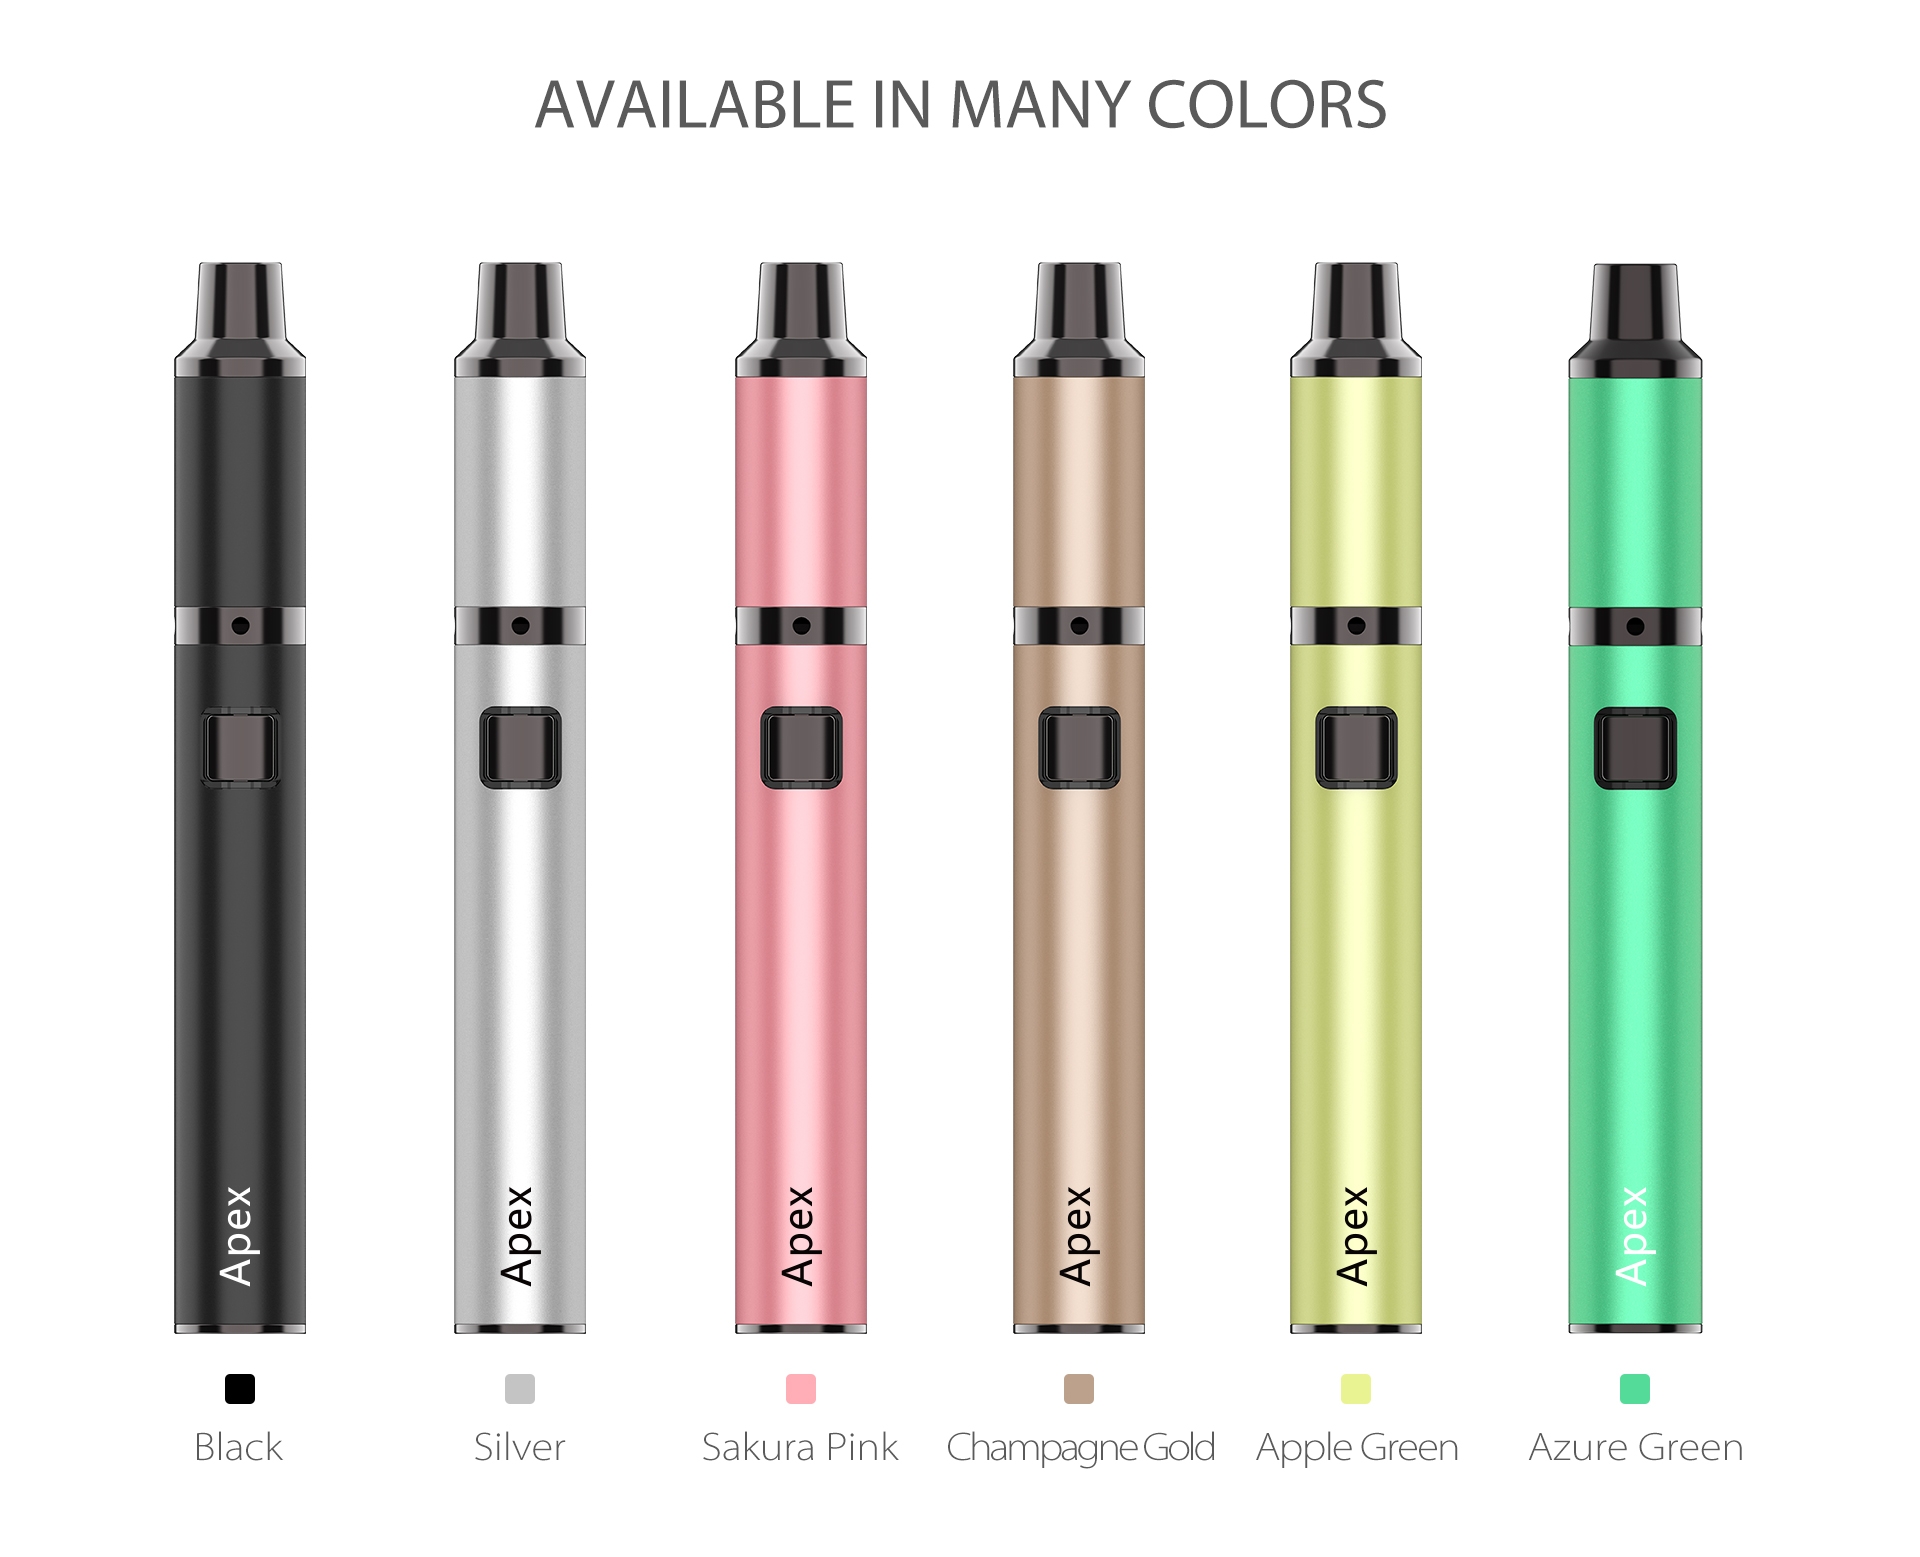 Yocan Apex concentrate vaporizer pen comes with 6 stylish colors.